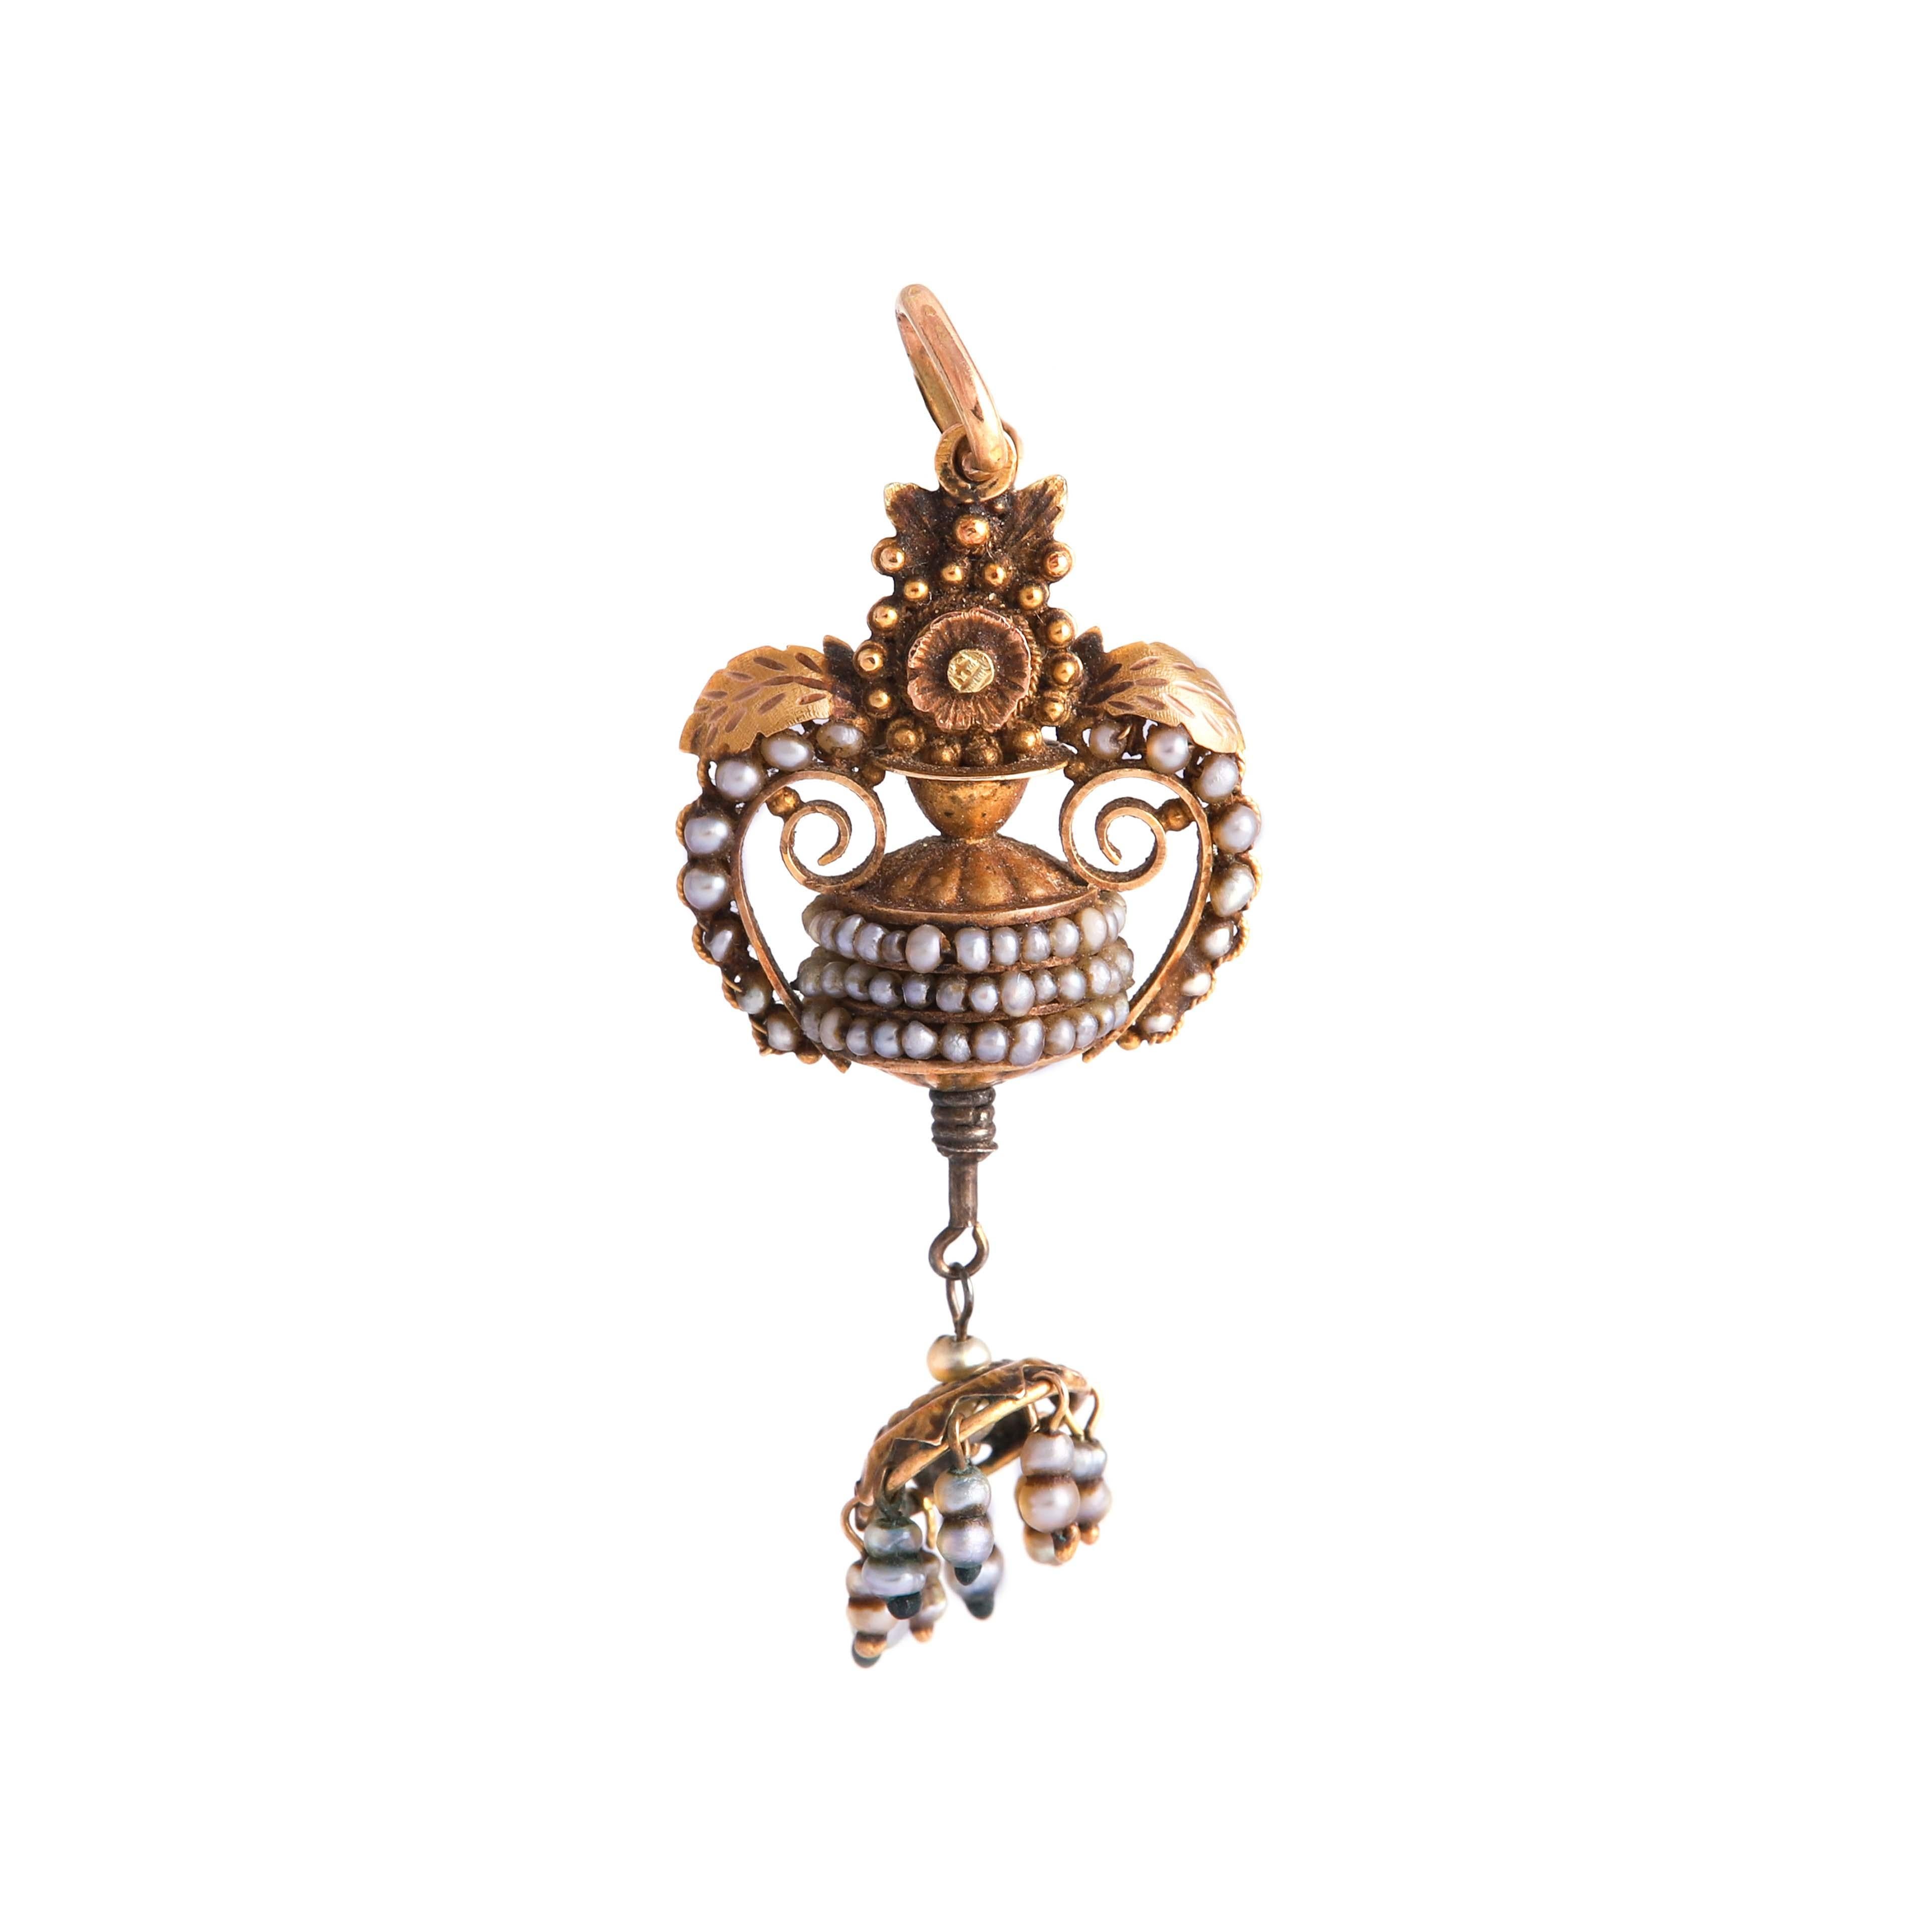 Antique Pearl Pendant.
Height (including the clasp): 4.70 centimeters. 
Gross weight: 3.36 g.